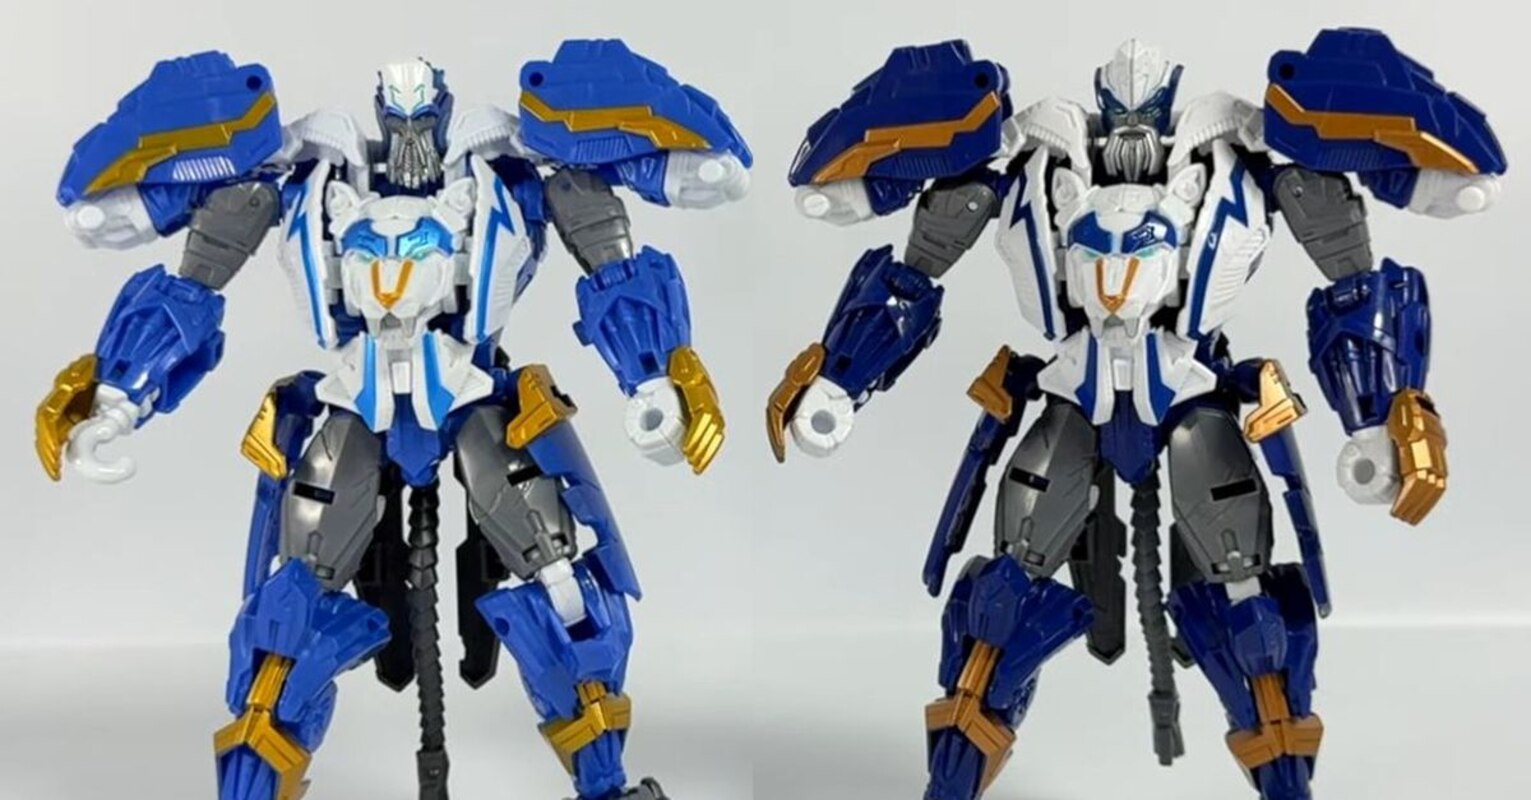 Star Raiders Thundertron, Nightstrike, Carcitron In-Hand Images & Video from Transformers Legacy United